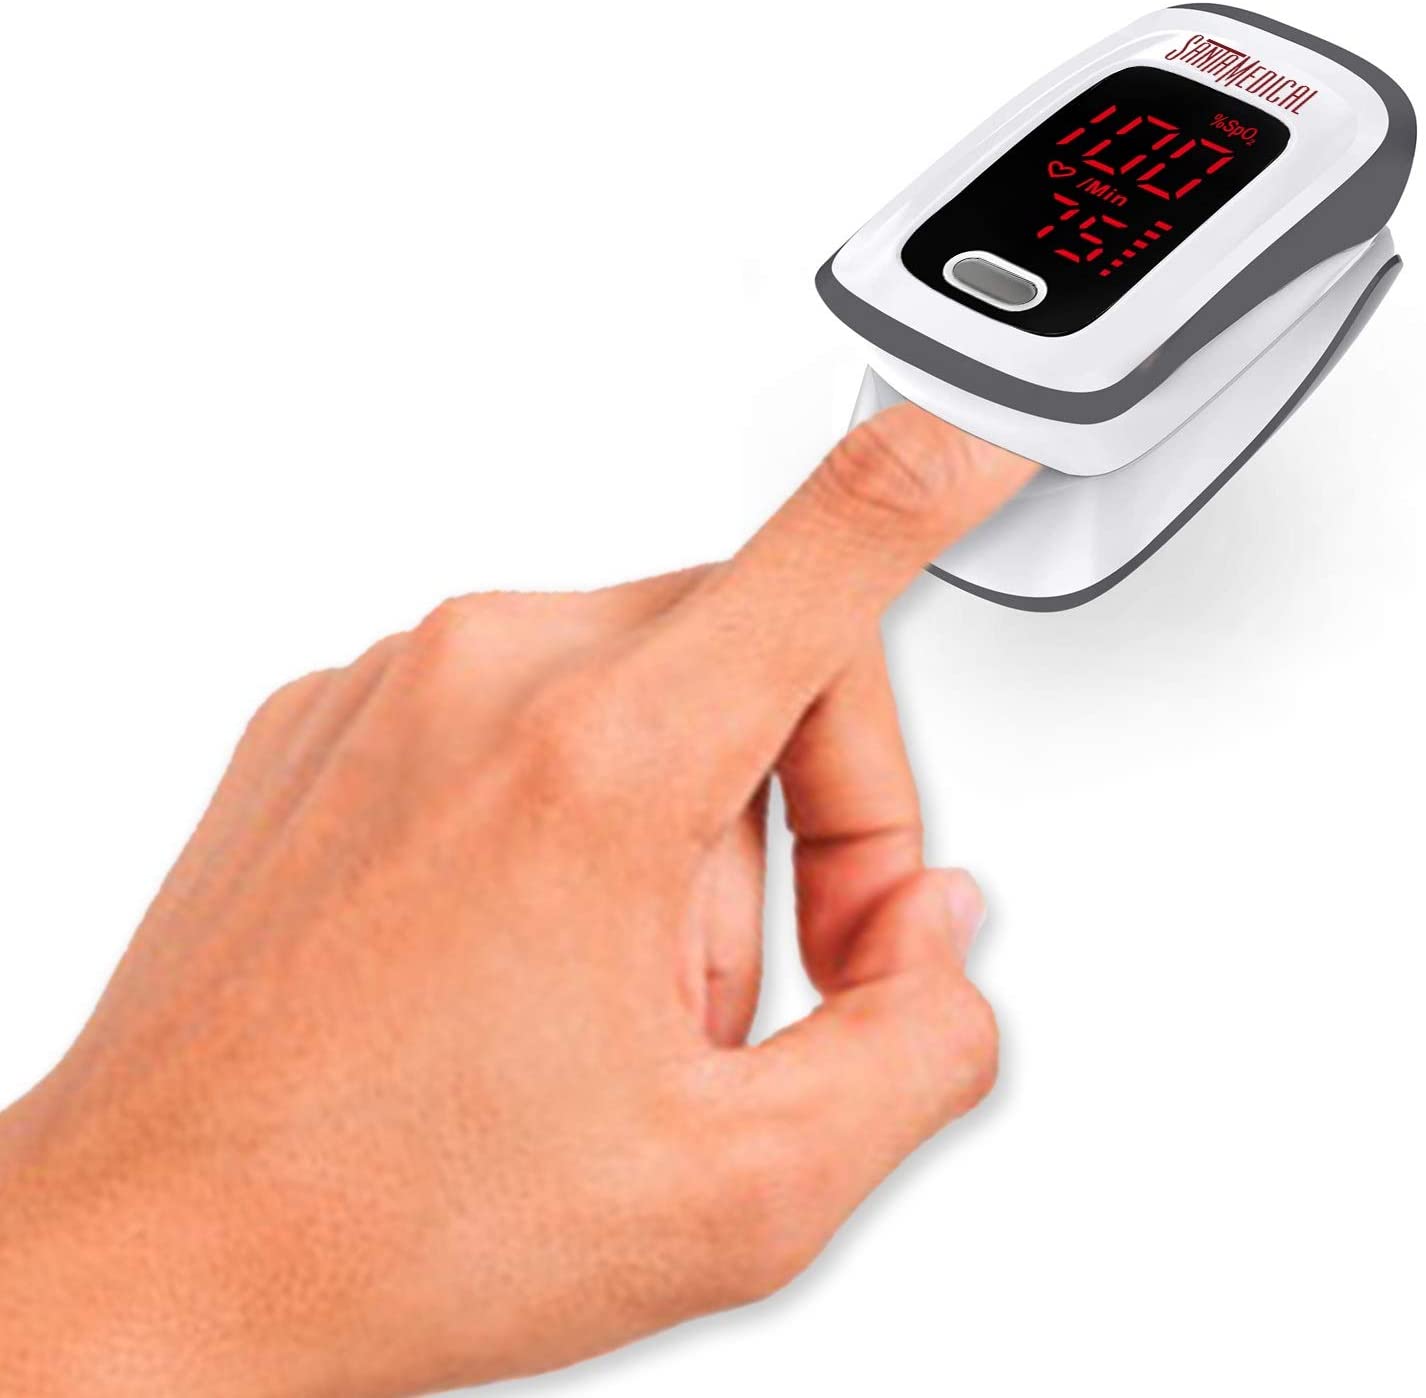 A hand with its forefinger resting in a pulse oximeter with an LED display.